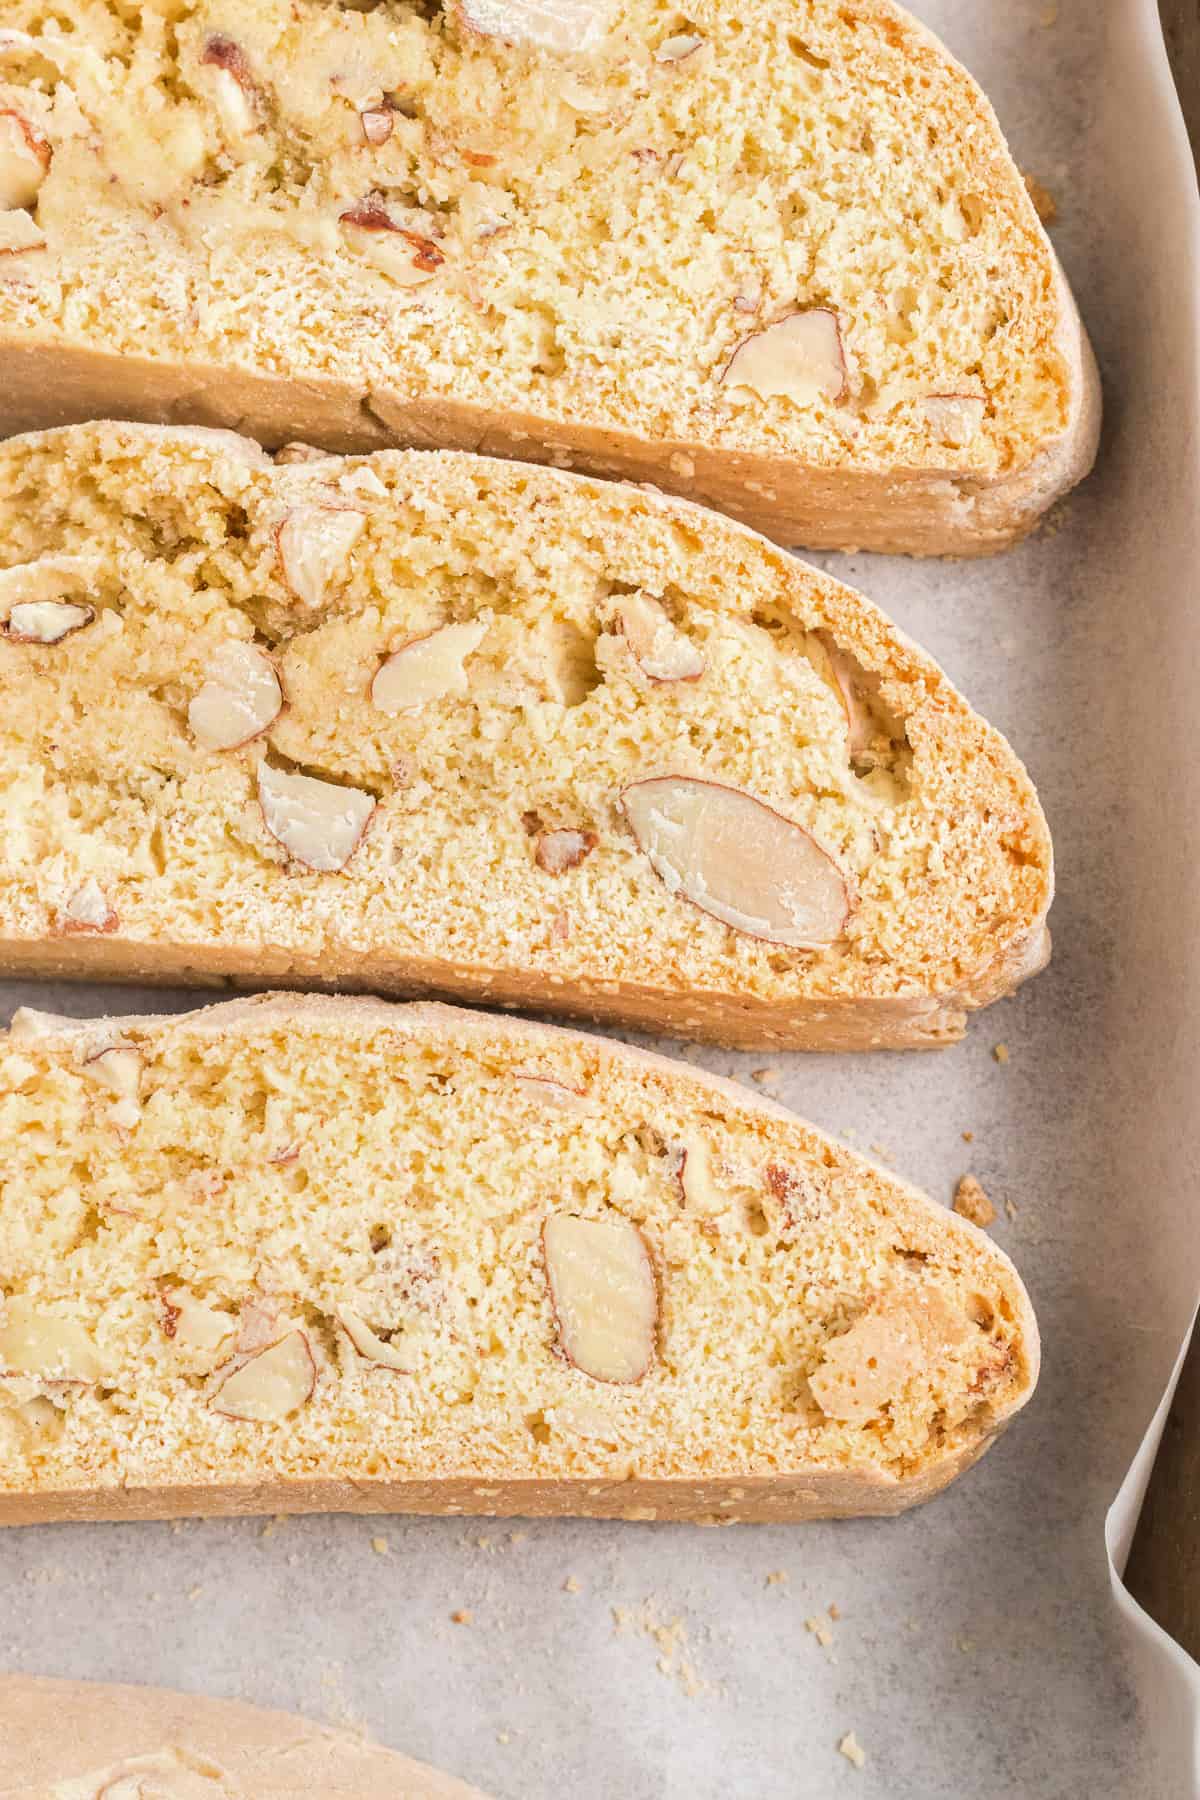 Toasted almonds in twice-baked homemade biscotti cookies.